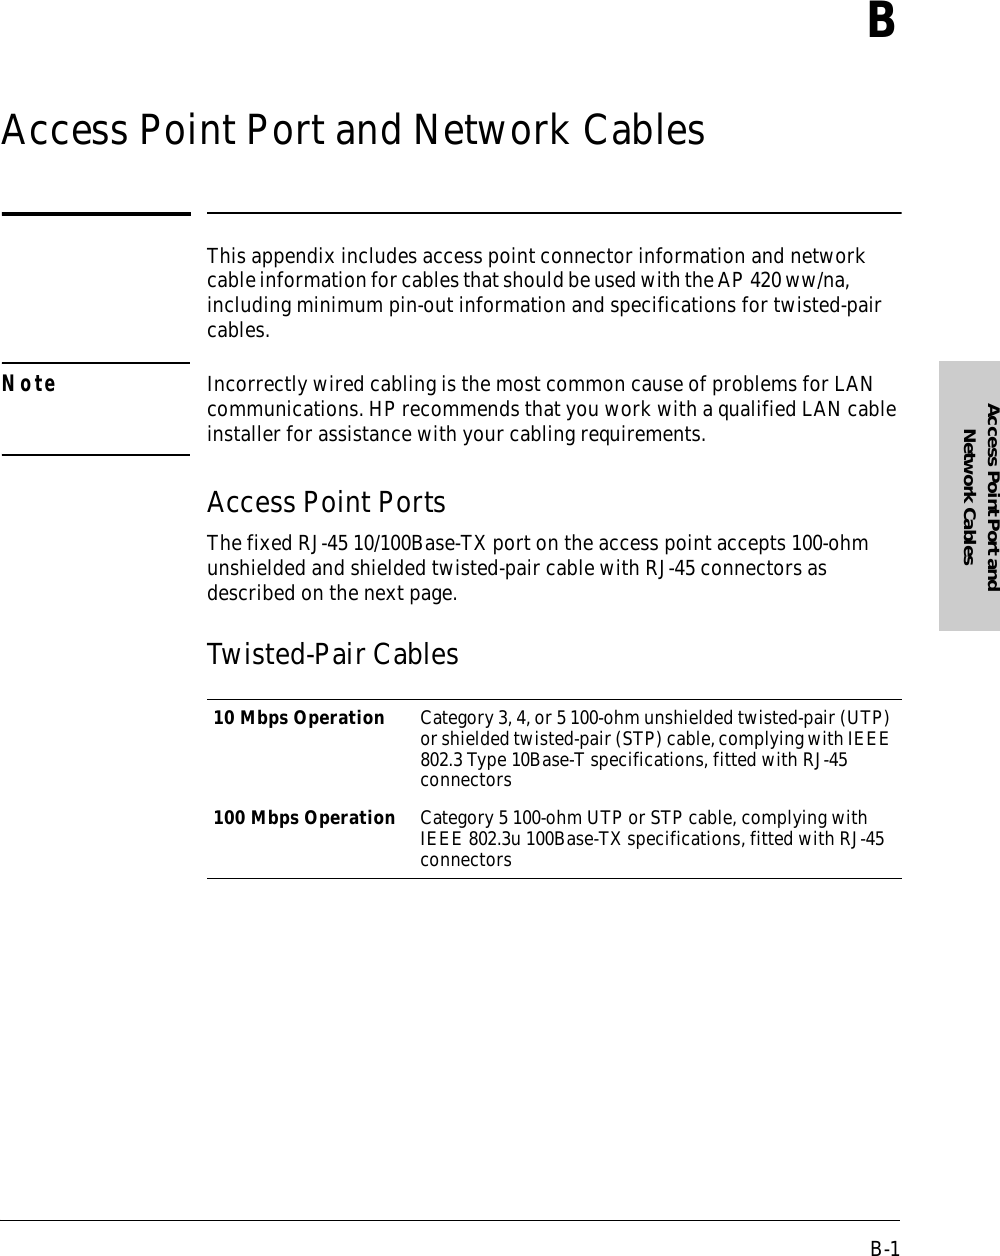 B-1Access Point Port and Network CablesBAccess Point Port and Network CablesThis appendix includes access point connector information and network cable information for cables that should be used with the AP 420 ww/na, including minimum pin-out information and specifications for twisted-pair cables.Note Incorrectly wired cabling is the most common cause of problems for LAN communications. HP recommends that you work with a qualified LAN cable installer for assistance with your cabling requirements.Access Point PortsThe fixed RJ-45 10/100Base-TX port on the access point accepts 100-ohm unshielded and shielded twisted-pair cable with RJ-45 connectors as described on the next page.Twisted-Pair Cables10 Mbps Operation Category 3, 4, or 5 100-ohm unshielded twisted-pair (UTP) or shielded twisted-pair (STP) cable, complying with IEEE 802.3 Type 10Base-T specifications, fitted with RJ-45 connectors100 Mbps Operation Category 5 100-ohm UTP or STP cable, complying with IEEE 802.3u 100Base-TX specifications, fitted with RJ-45 connectors